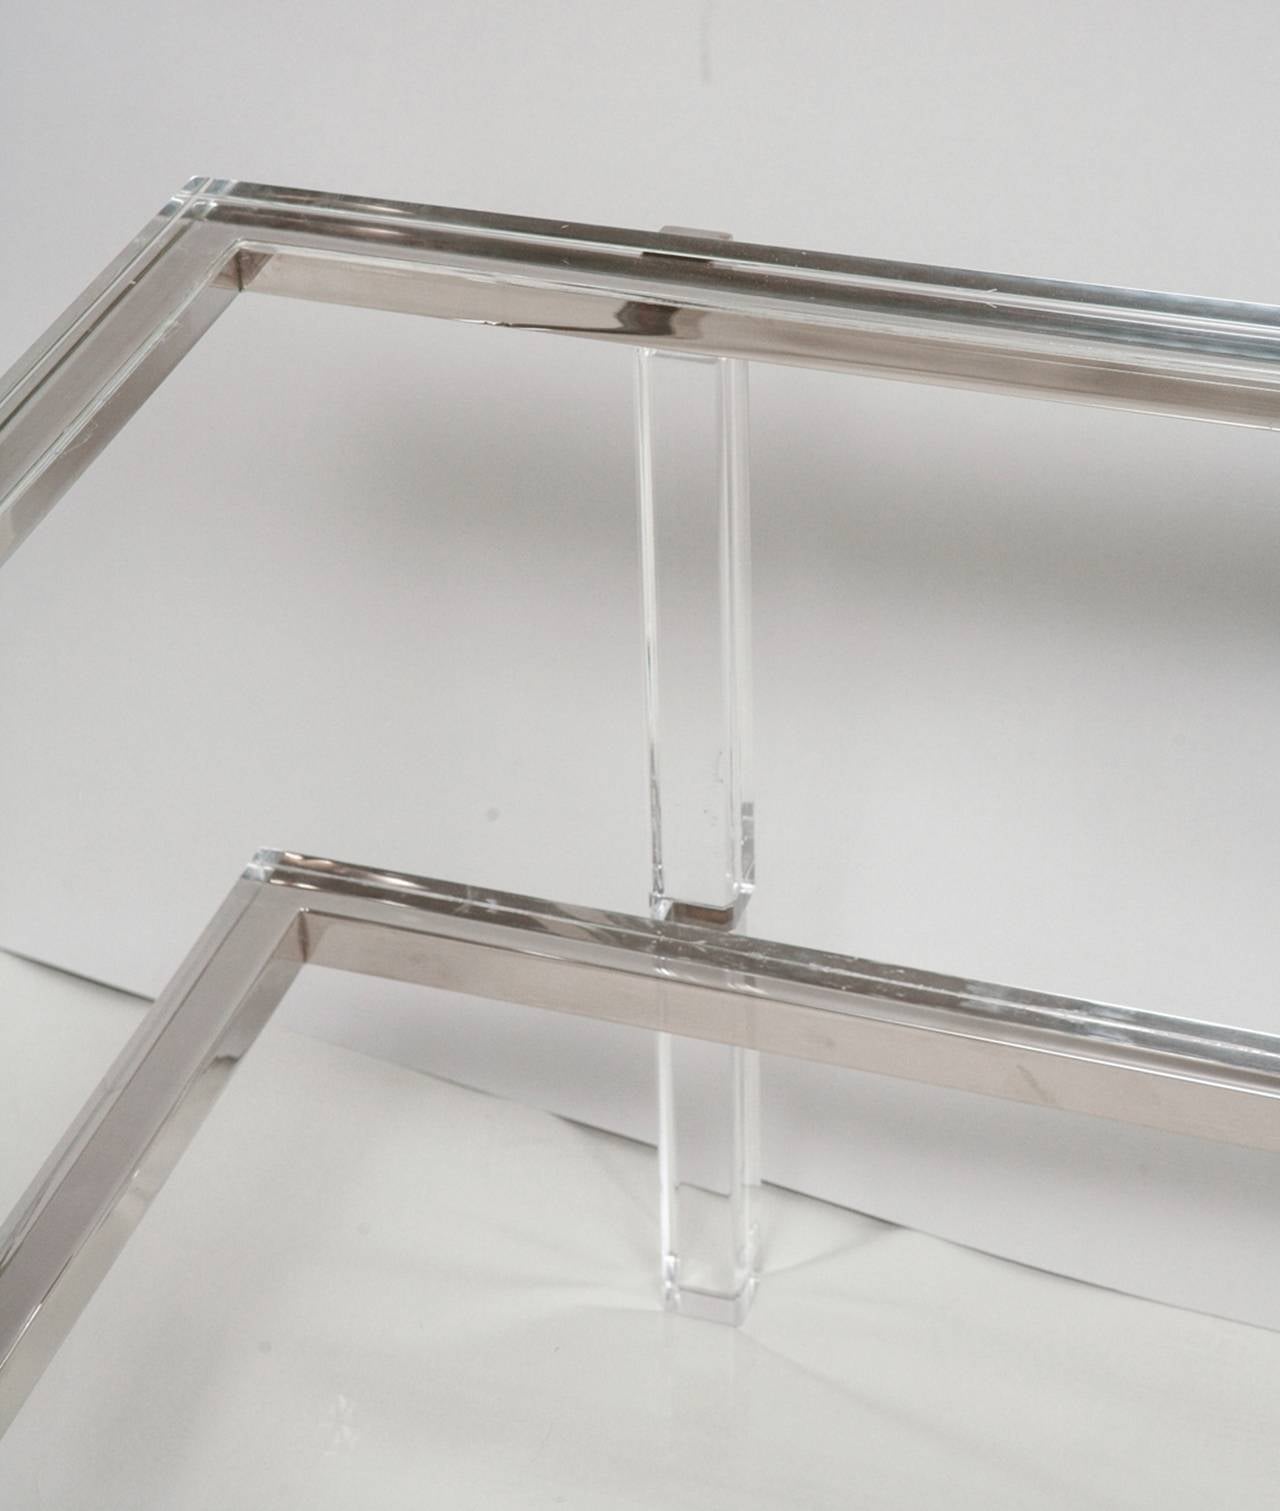 Late 20th Century Lucite and Nickel Two-Level Coffee Table by Charles Hollis Jones